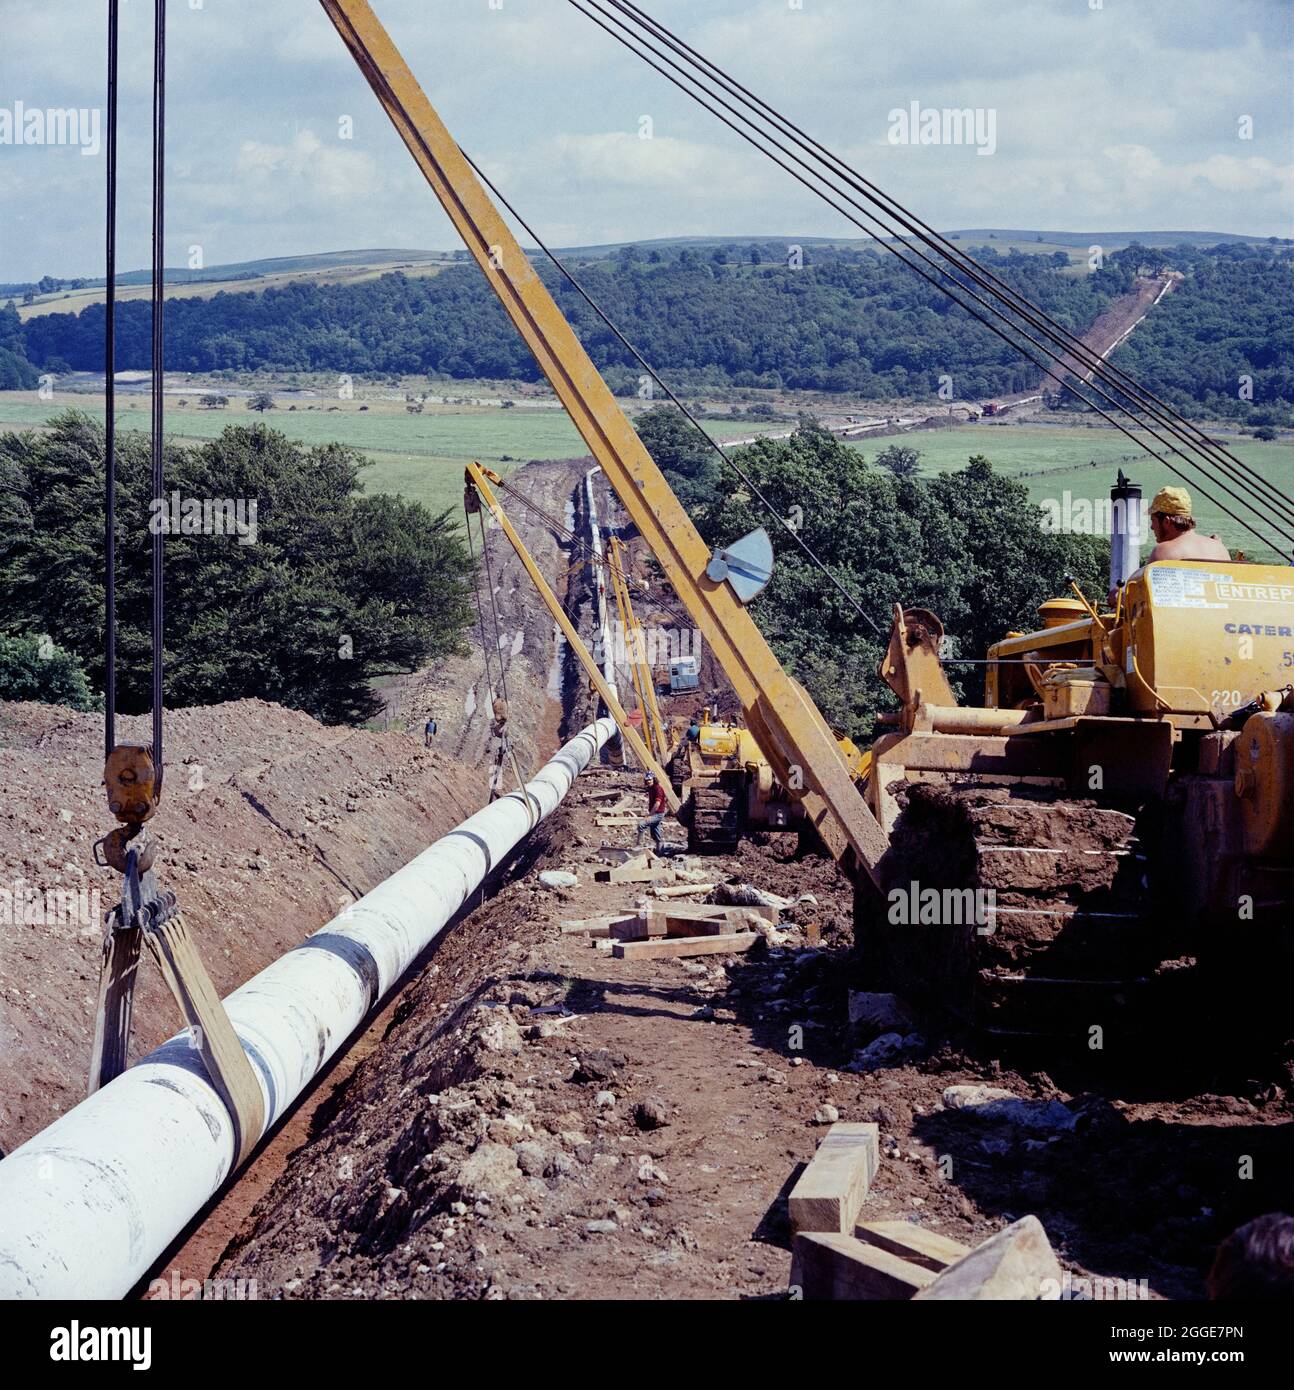 A view along the route of the Brampton pipeline, showing pipelaying equipment in the foreground lowering the pipeline into a trench. In 1975, Laing Pipelines laid the Brampton gas pipeline between Longtown near Carlisle to the east of Bishop Auckland. The pipeline is a section of the Frigg pipeline carrying natural gas from the North Sea to near Peterhead in Scotland. The headquarters for the Laing contract was located at an old quarry near Brampton. Stock Photo